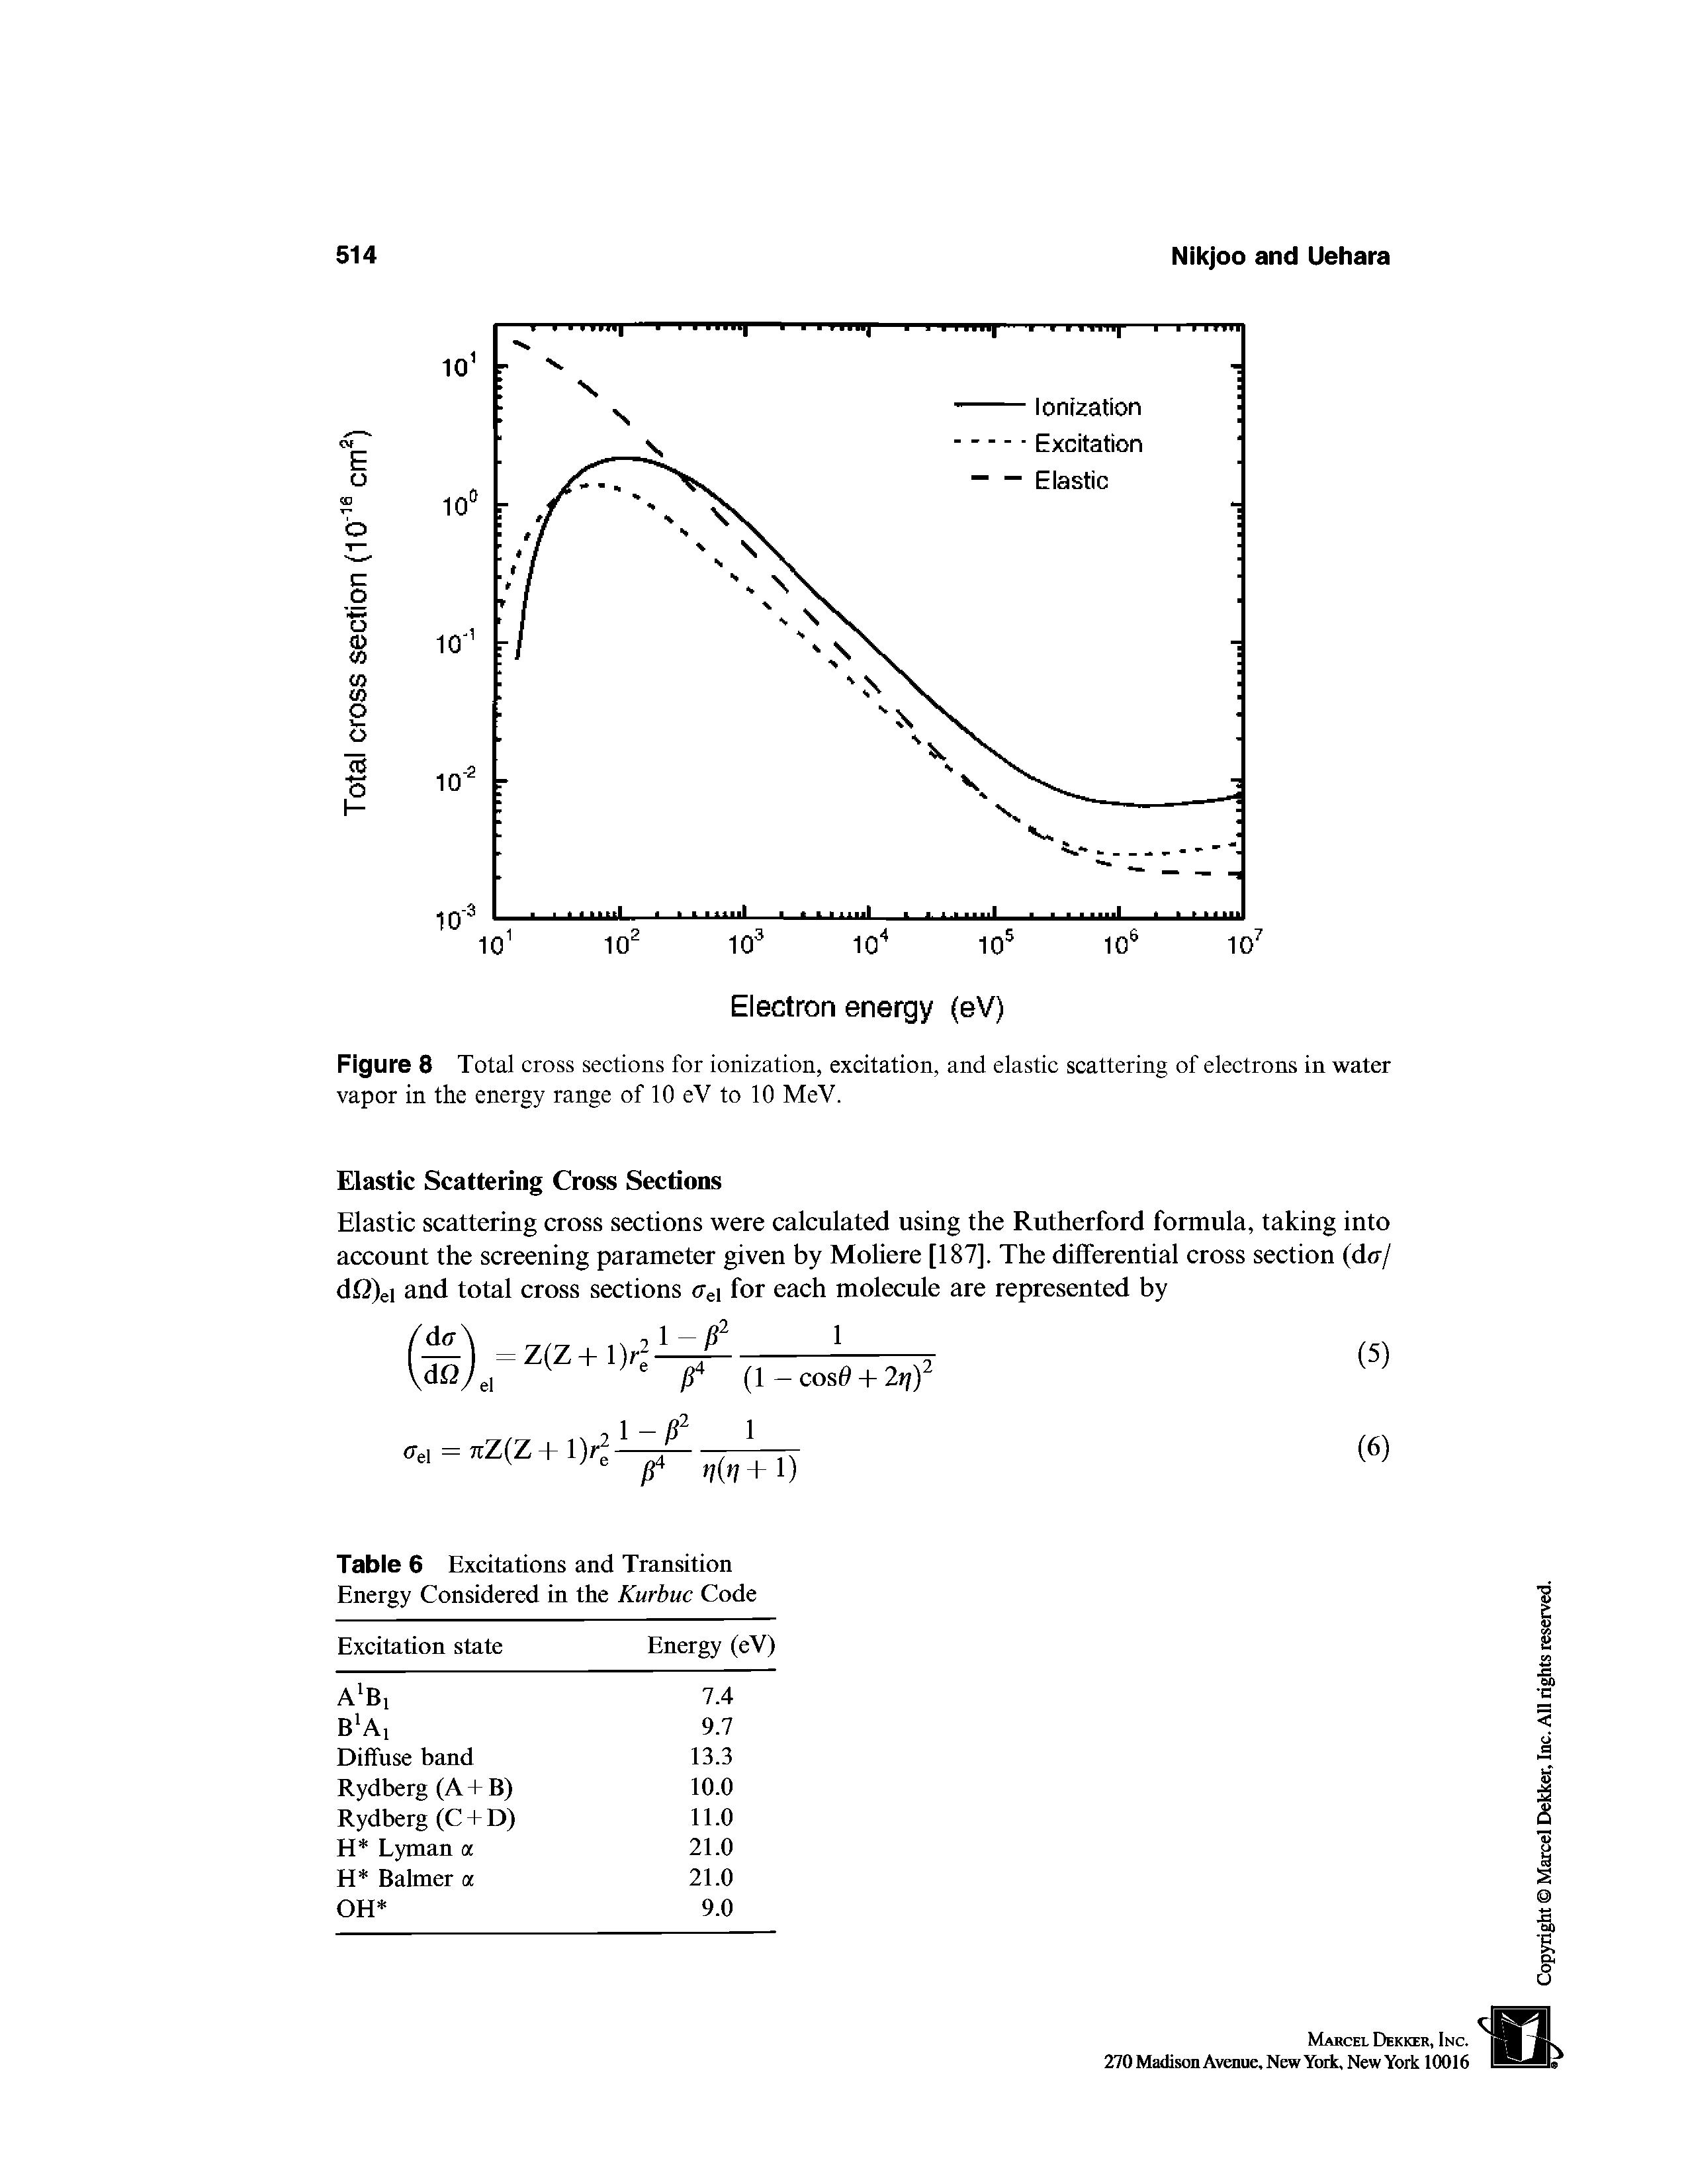 Figure 8 Total cross sections for ionization, excitation, and elastic scattering of electrons in water vapor in the energy range of 10 eV to 10 MeV.